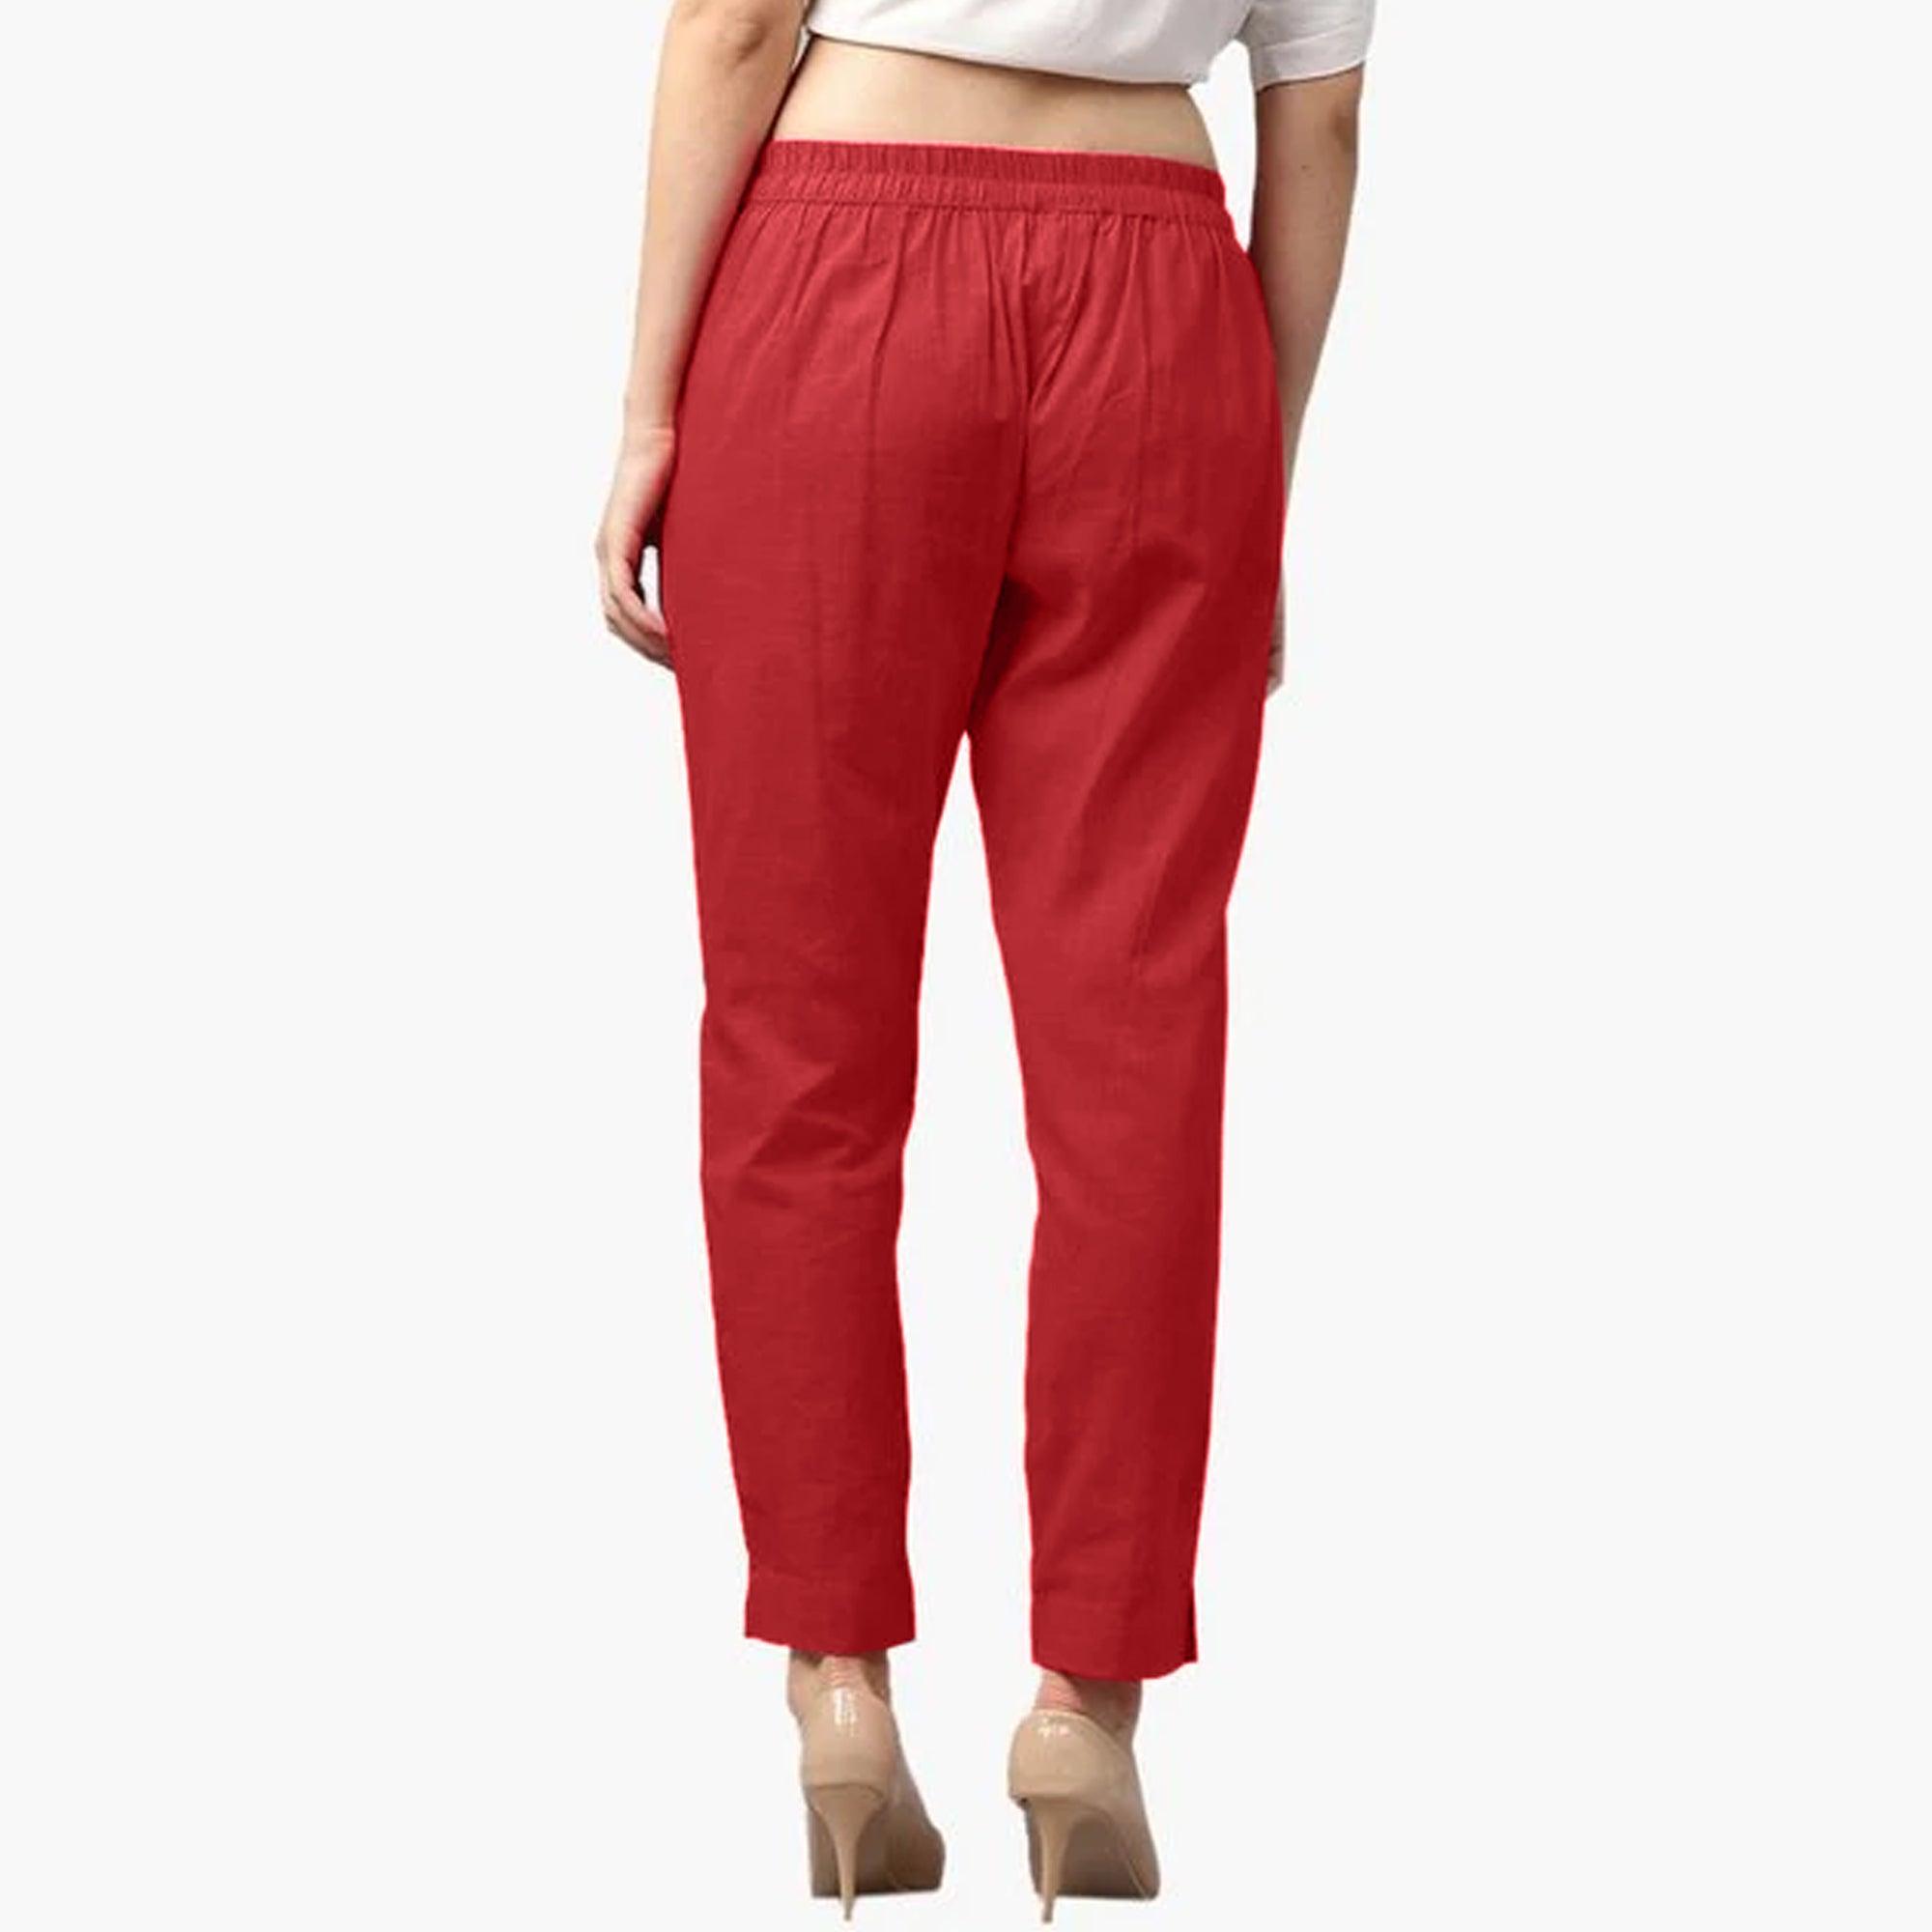 Mesmerising Coral Red Colored Casual Wear Cotton Pant - Peachmode